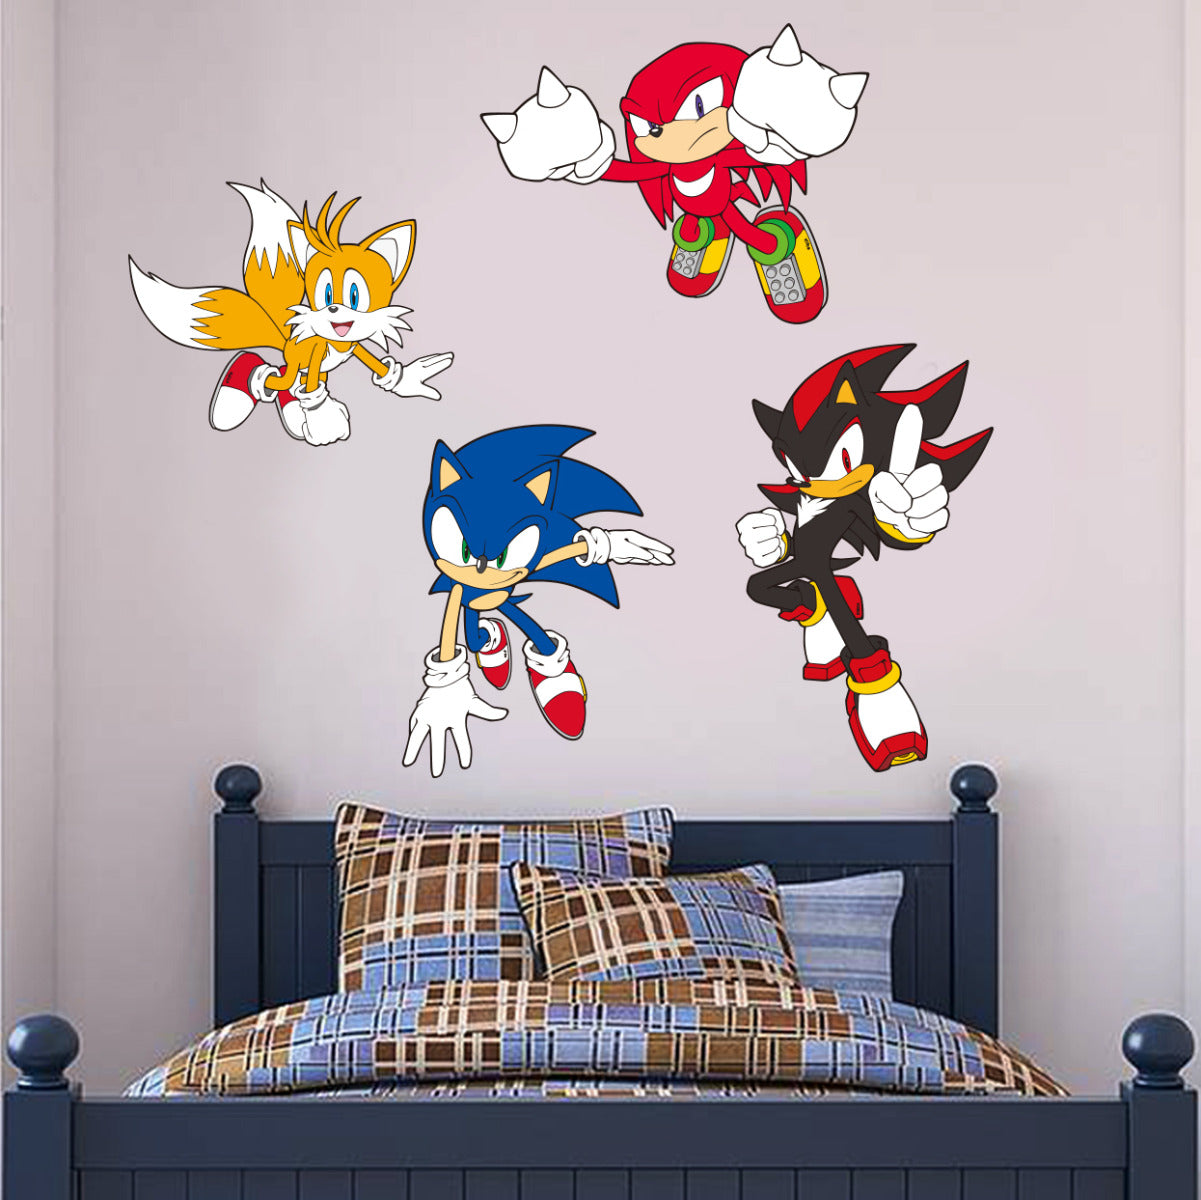 Sonic The Hedgehog - Sonic, Tails, Knuckles and Shadow Wall Stickers